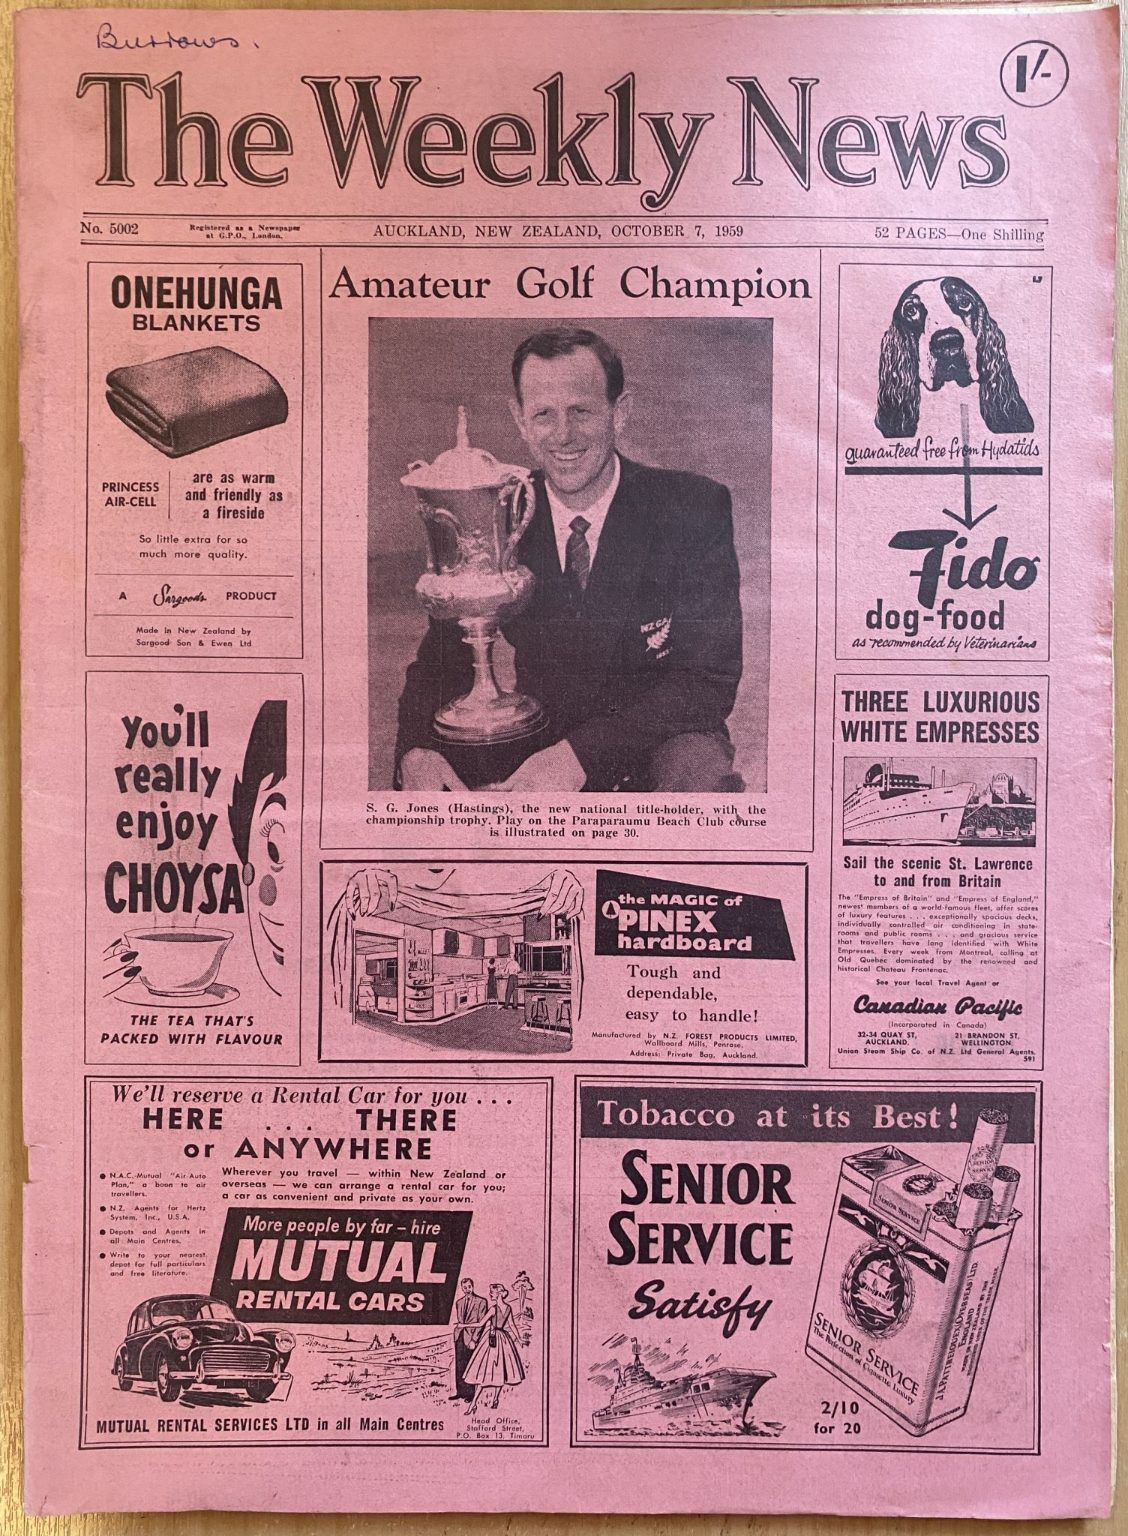 OLD NEWSPAPER: The Weekly News - No. 5002, 7 October 1959